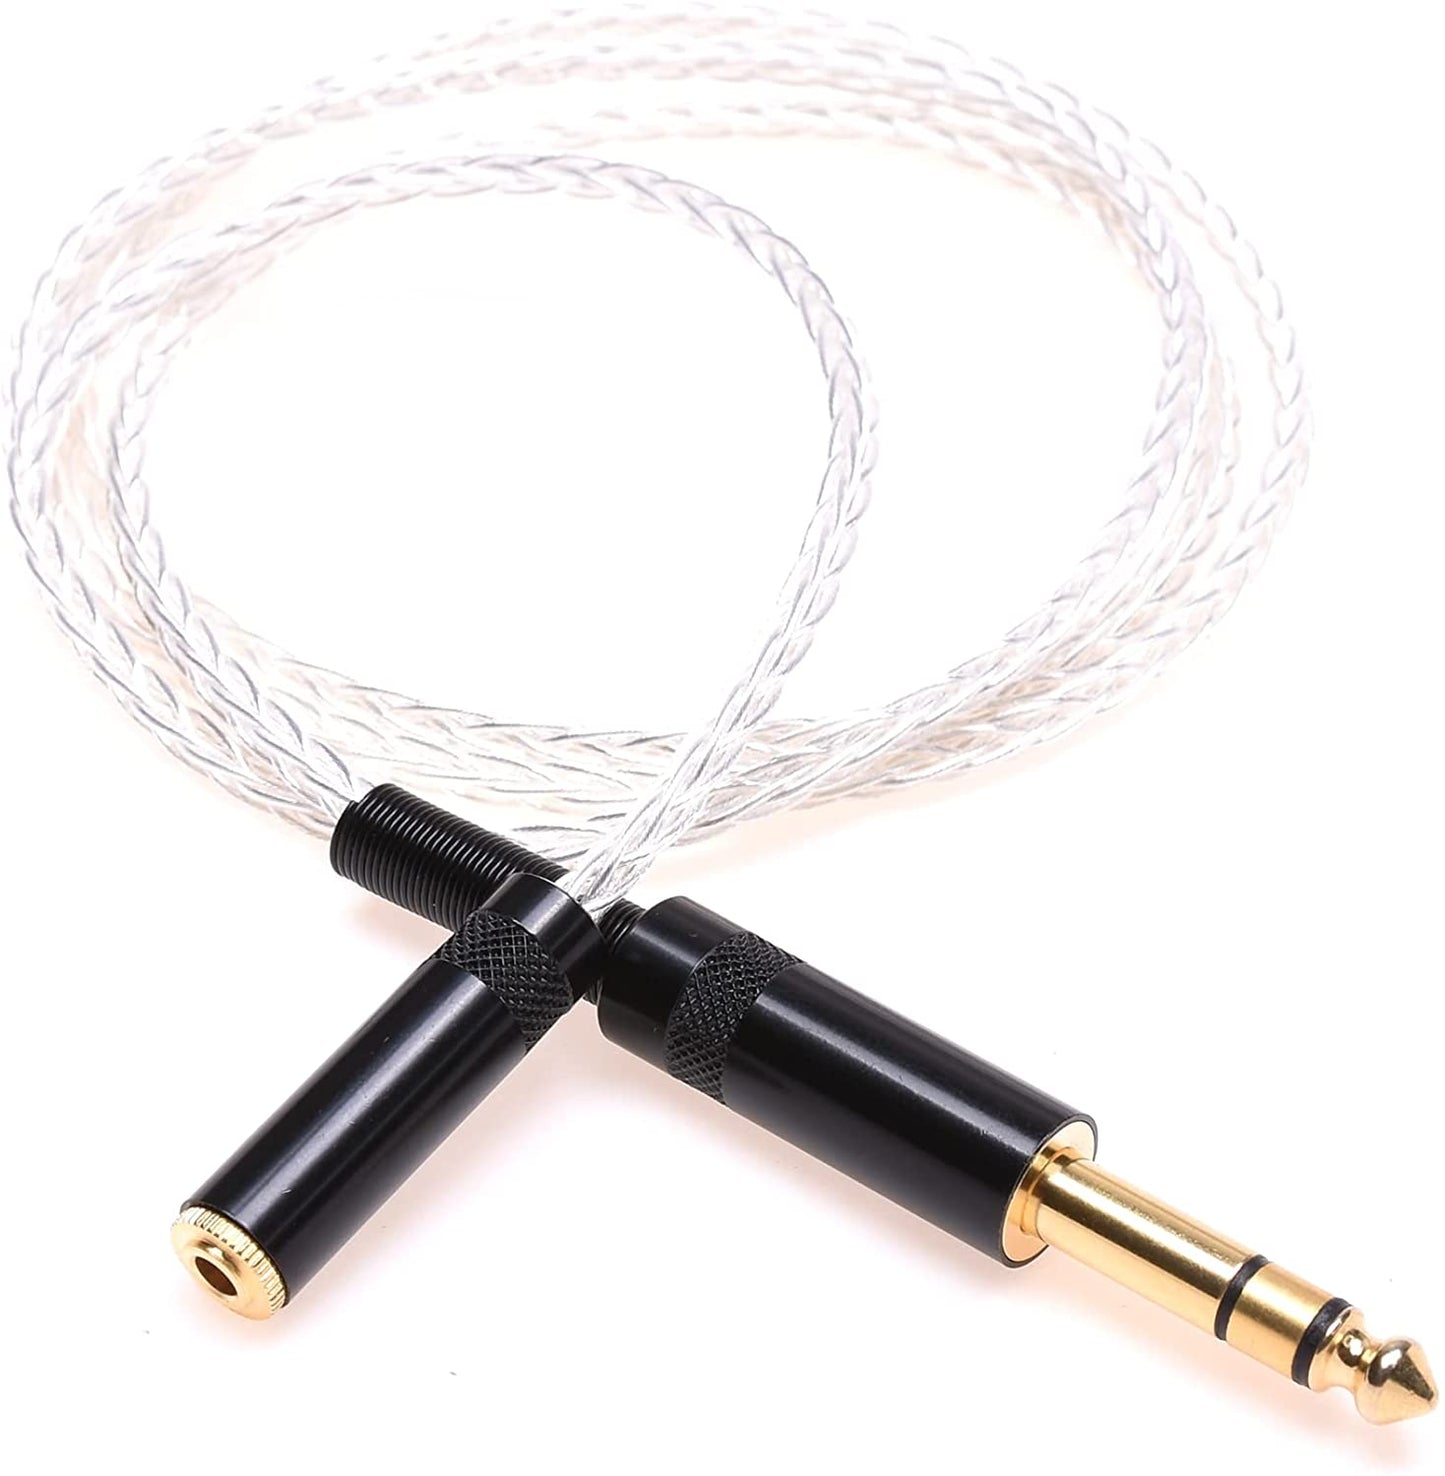 1/4 6.35mm Male to 3.5mm Female Headphone Extension Cable 8Cores Silver Plated HiFi Cable Audio Adapter